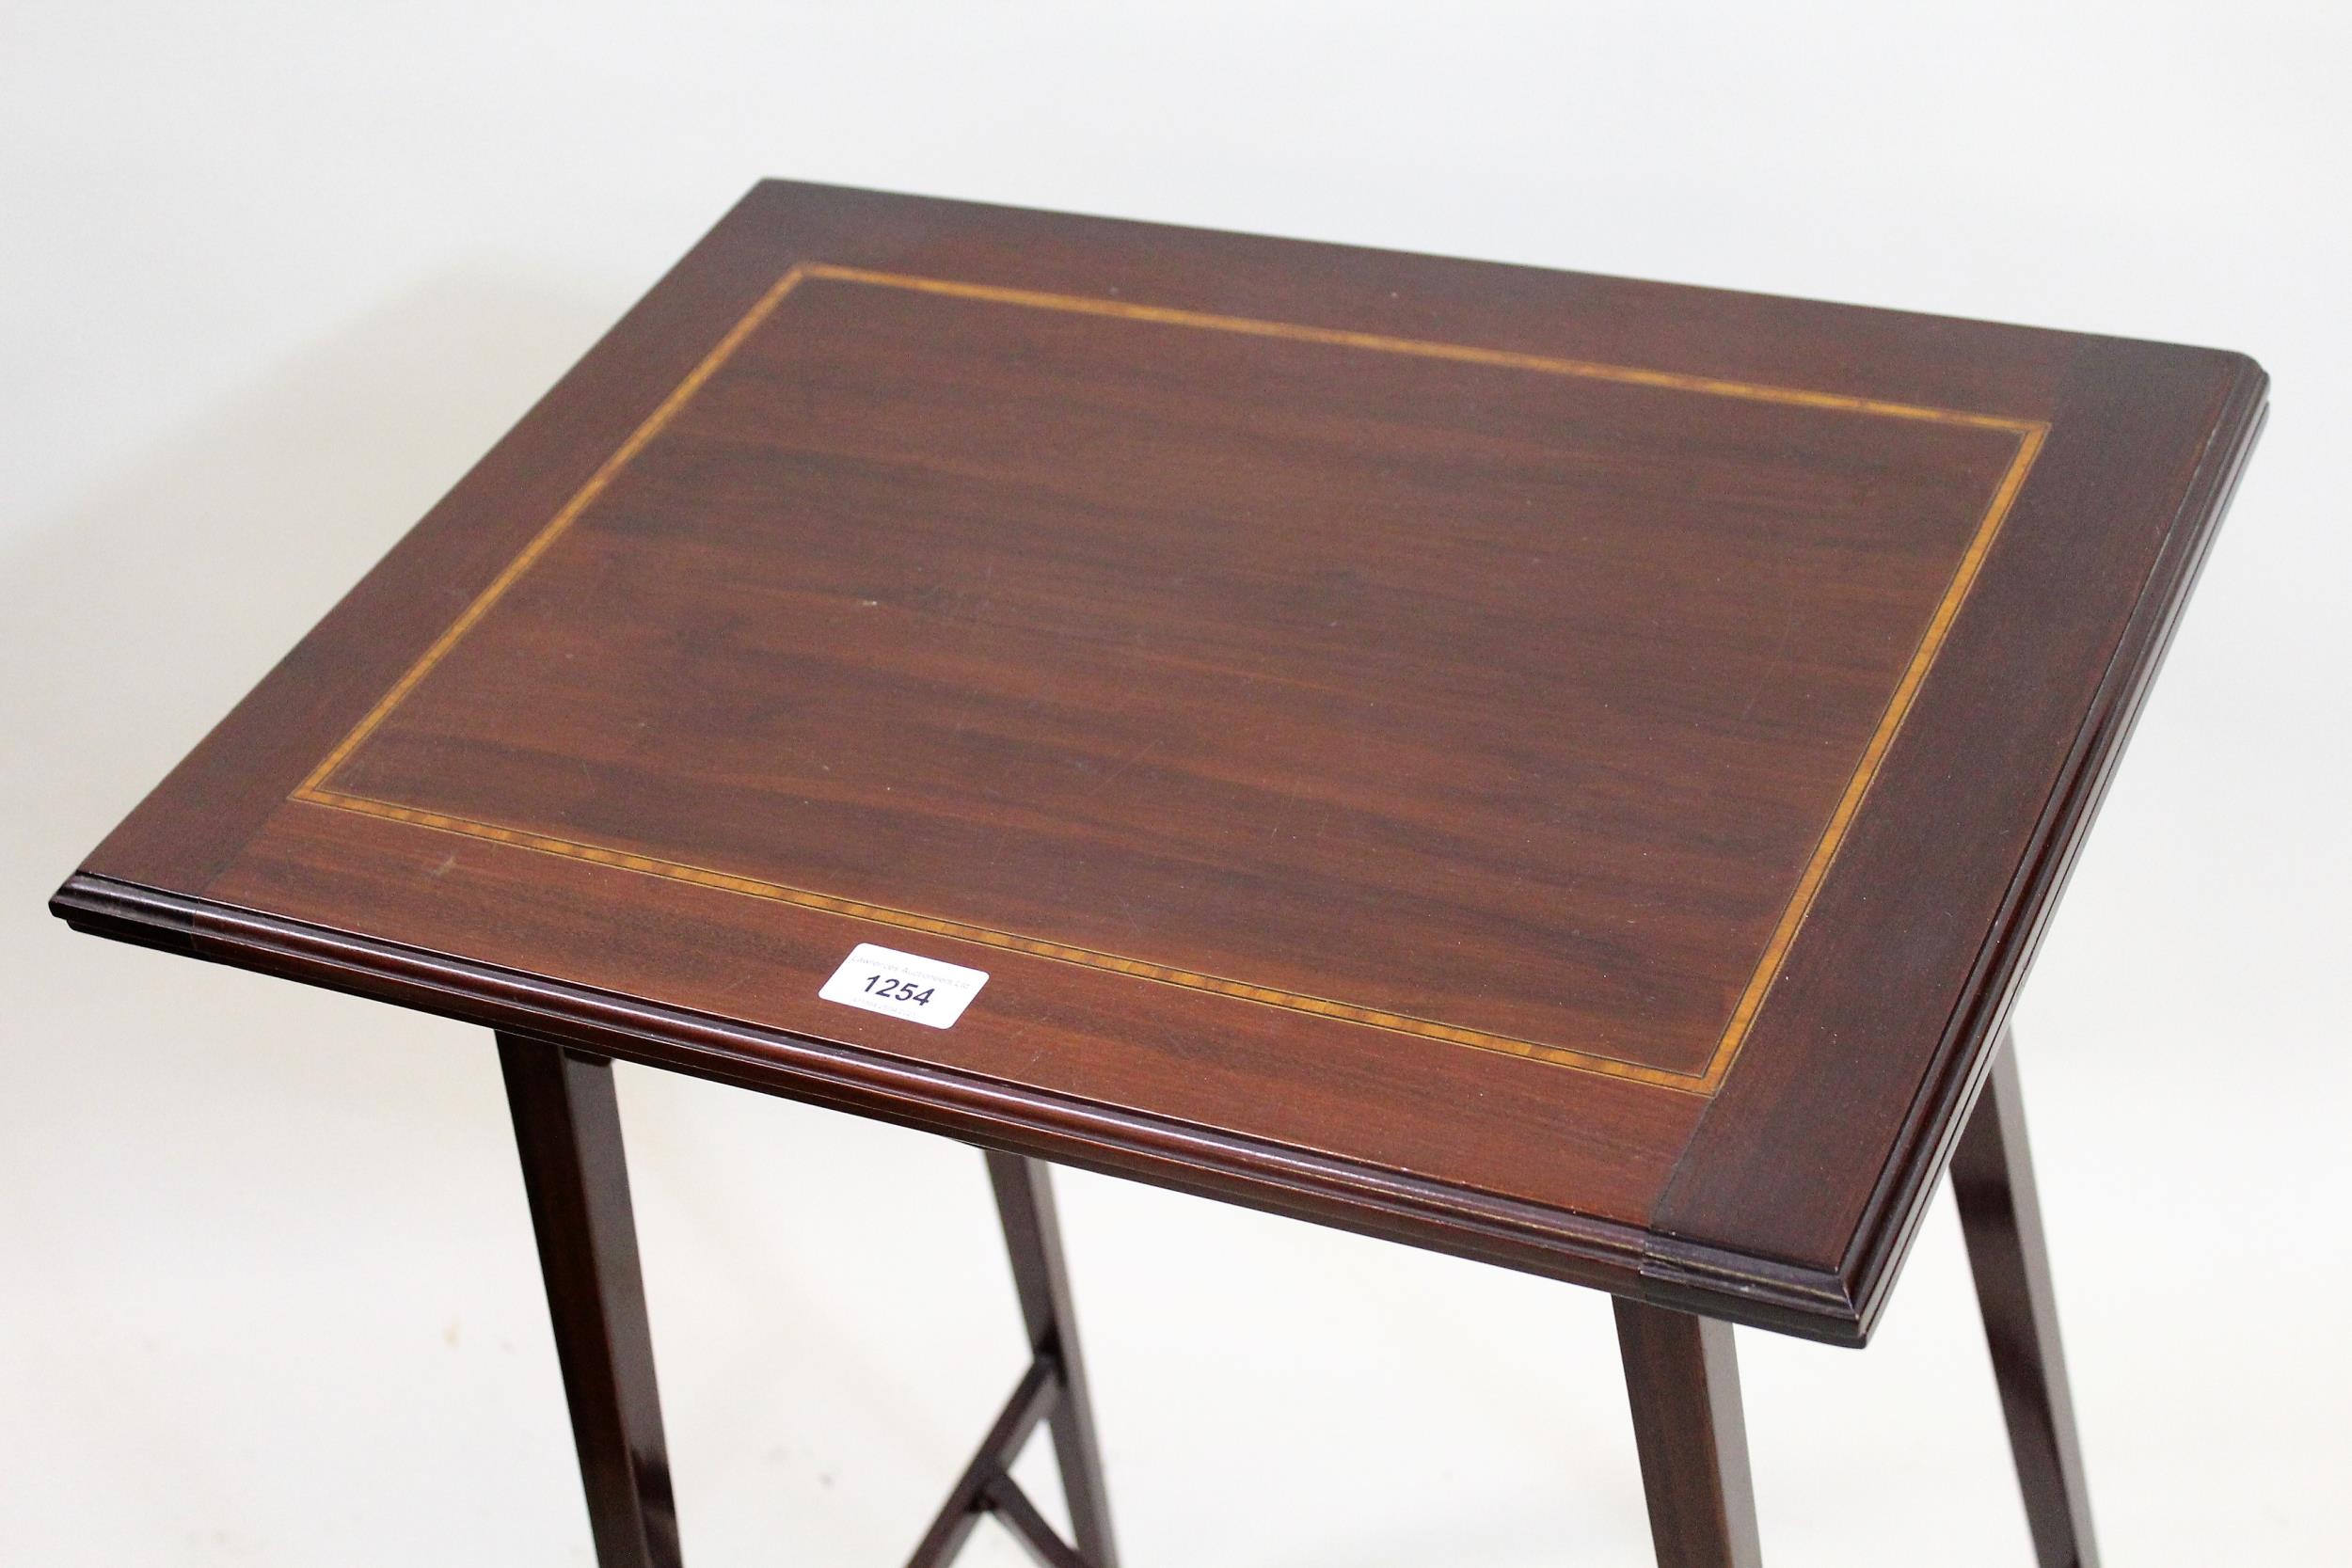 Edwardian mahogany crossbanded and inlaid fold-over card table, with baize lined interior, raised on - Image 2 of 3